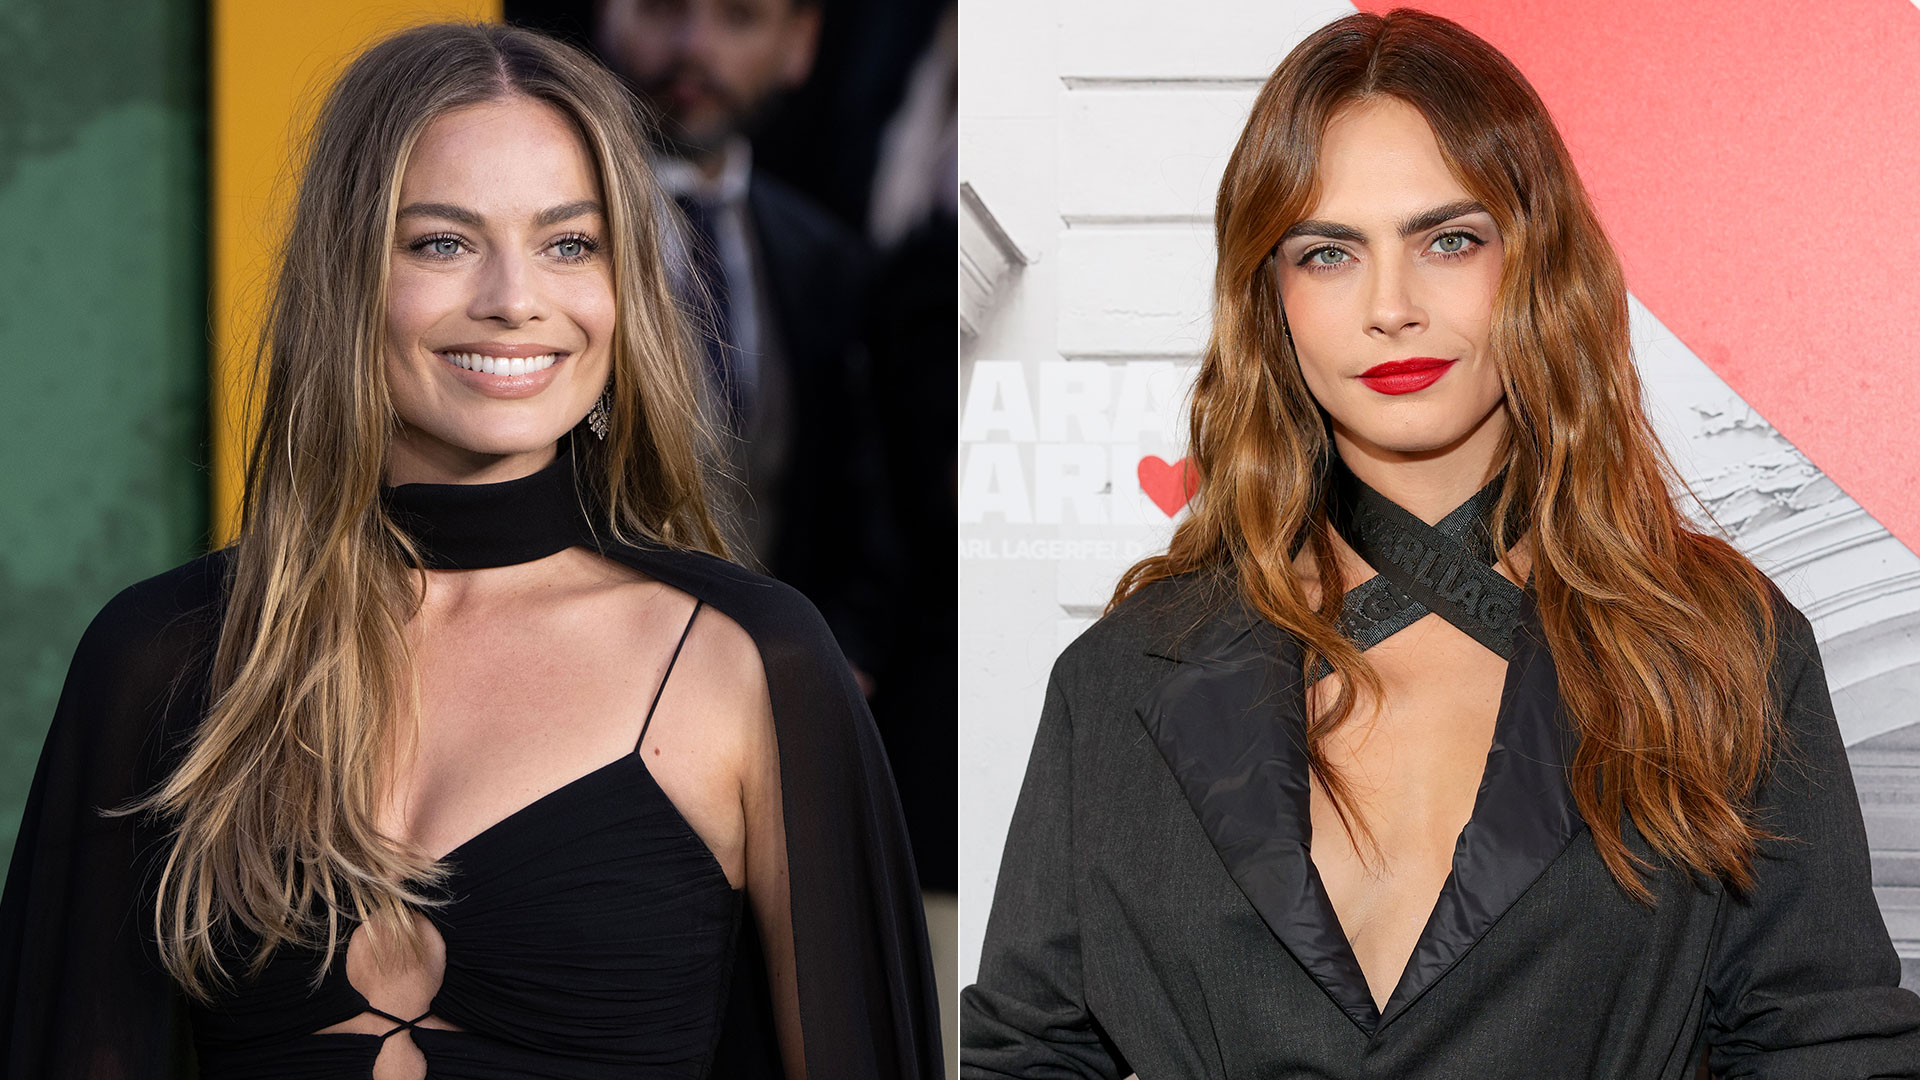 Hollywood Stars Margot Robbie And Cara Delevingne (Getty Images)